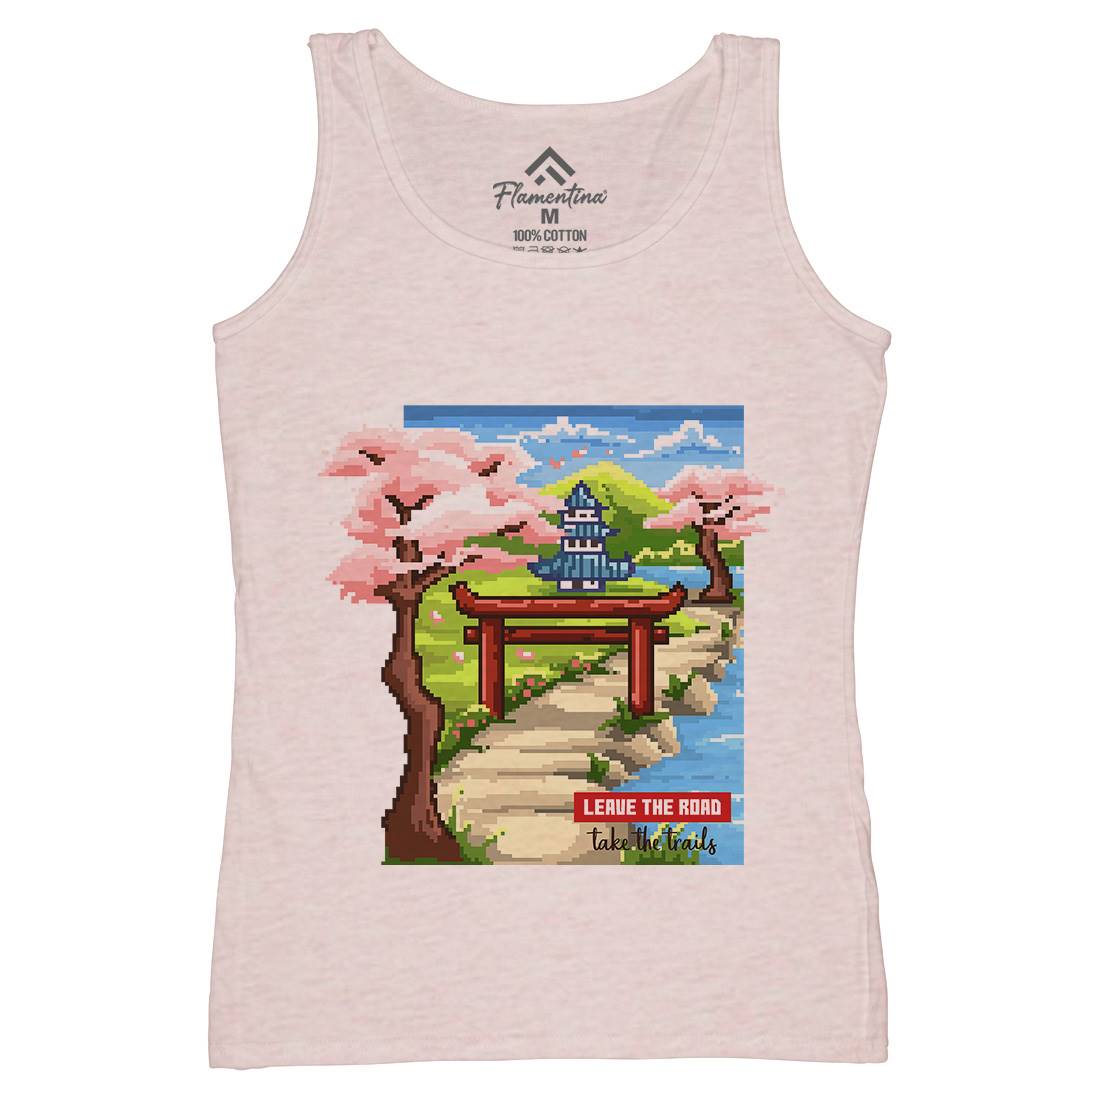 Leave The Roads Take The Trails Womens Organic Tank Top Vest Nature B924